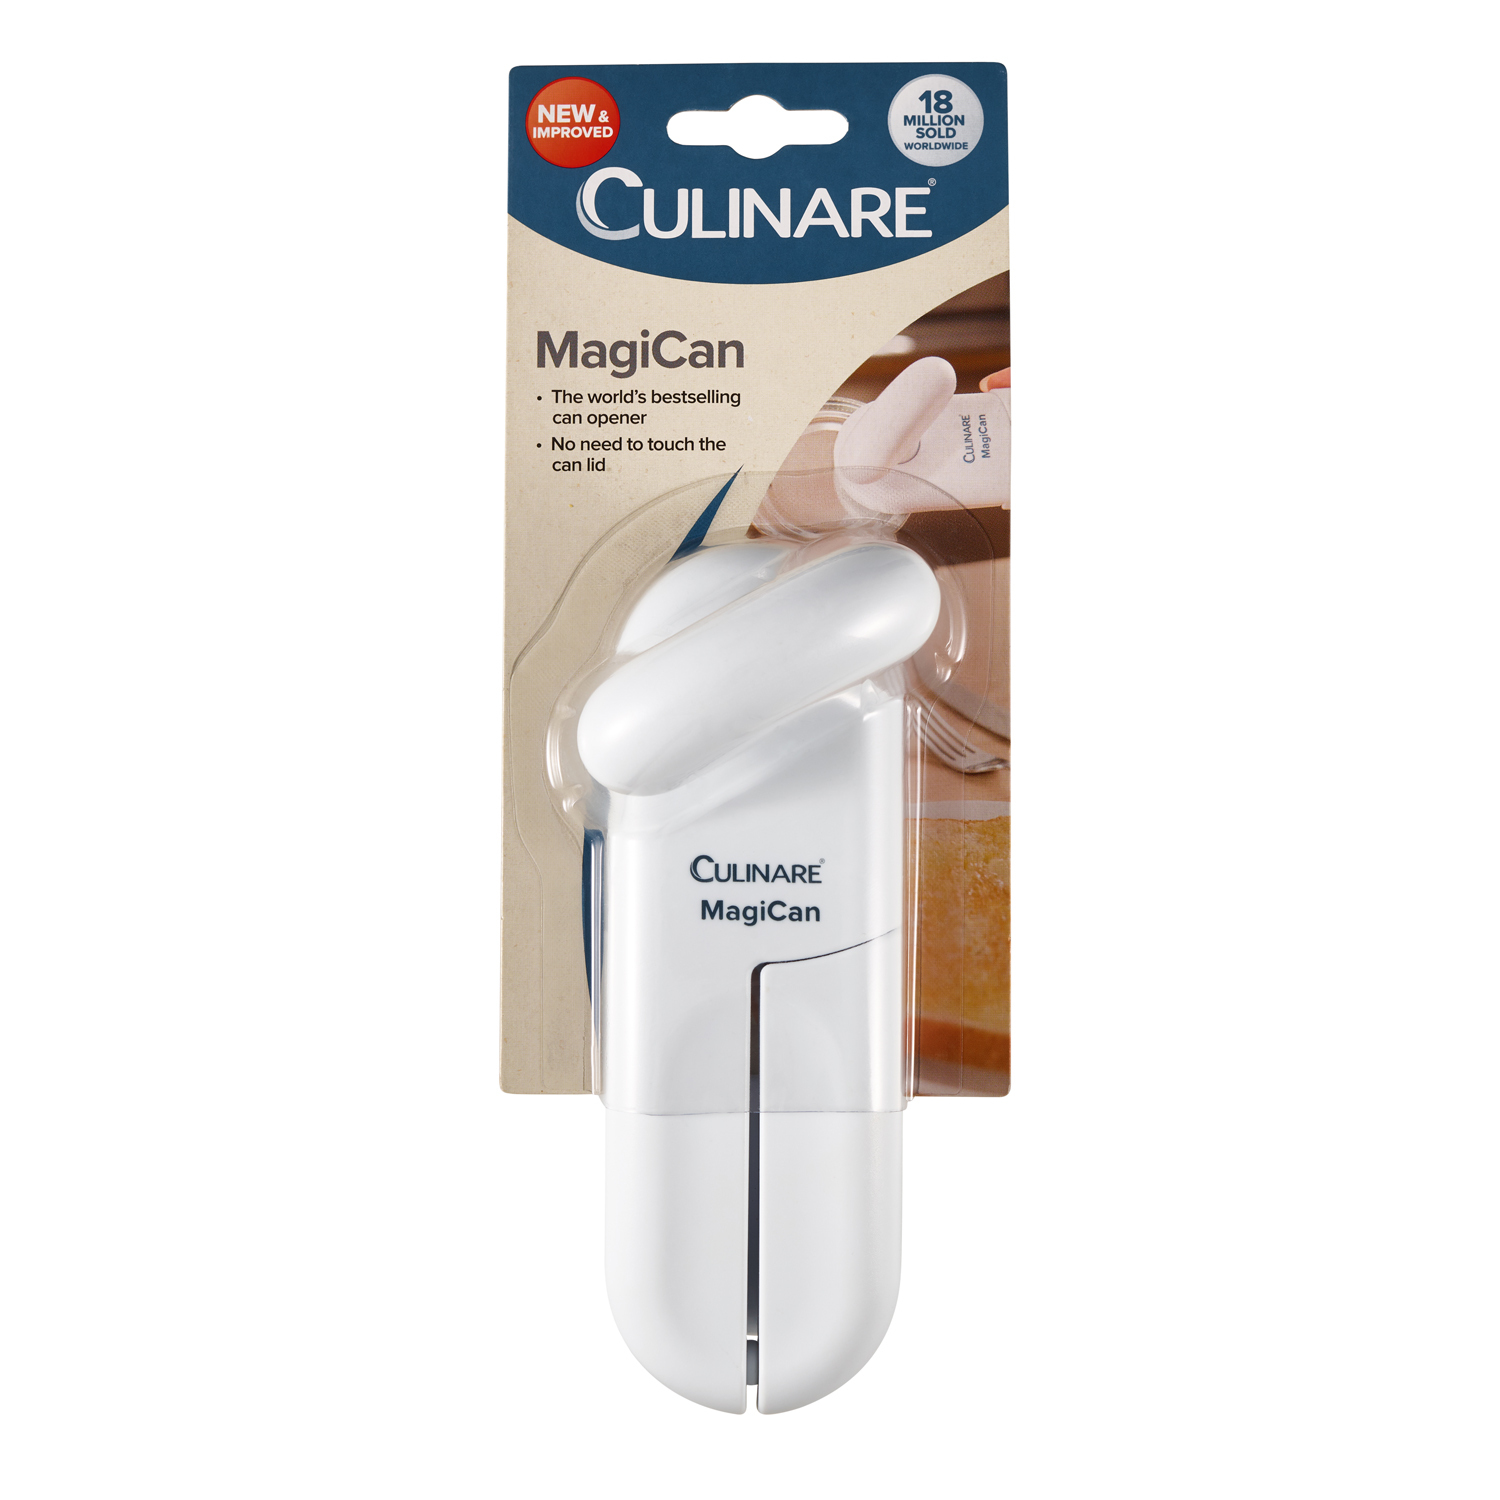 Culinare MagiCan - New and Improved Can Opener Image 1